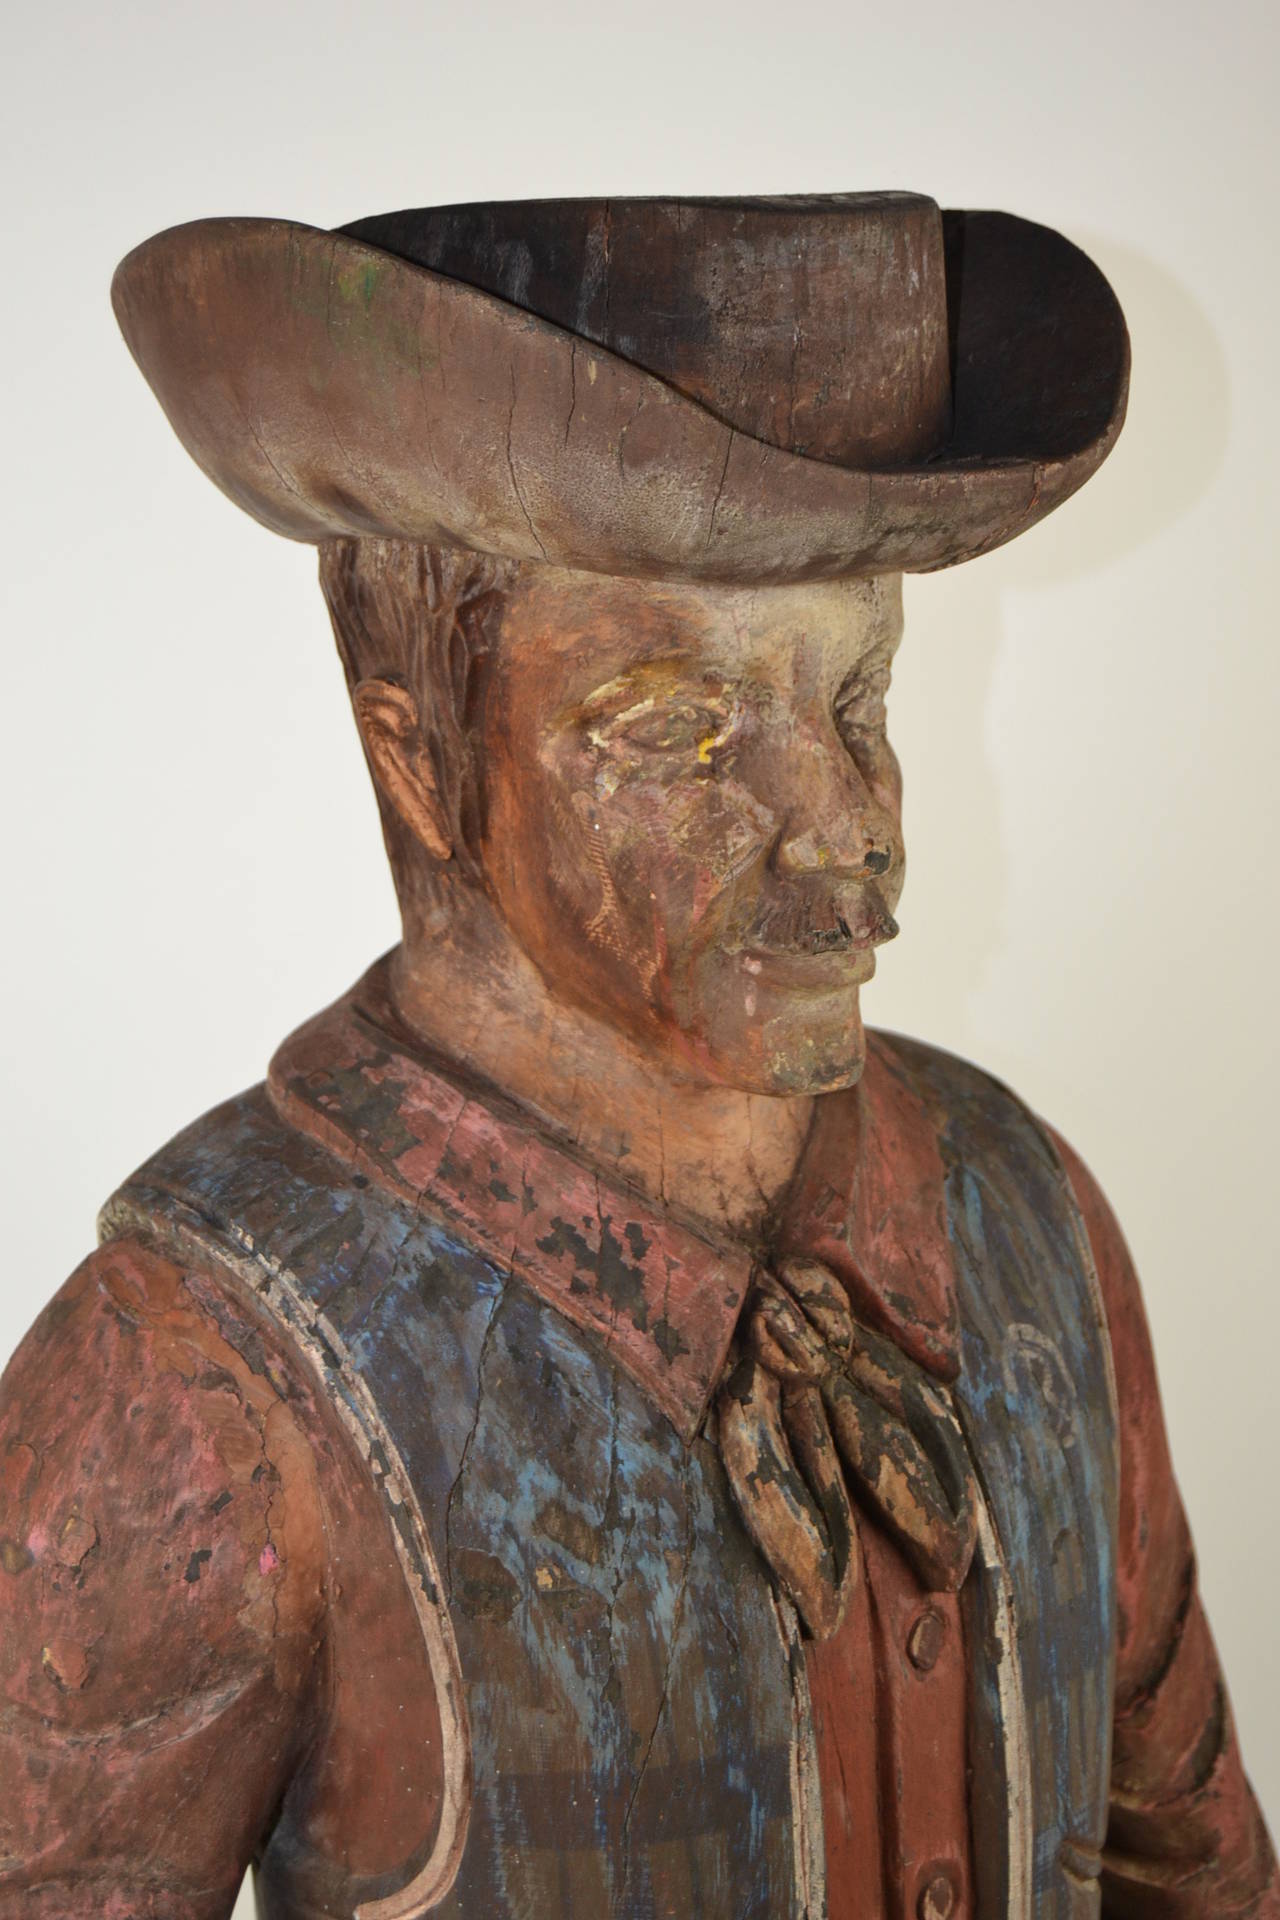 Old full size hand-carved wooden cowboy sculpture. Nice worn patina. Holding his hand on the gun ready to shoot the enemy. Western collectable.